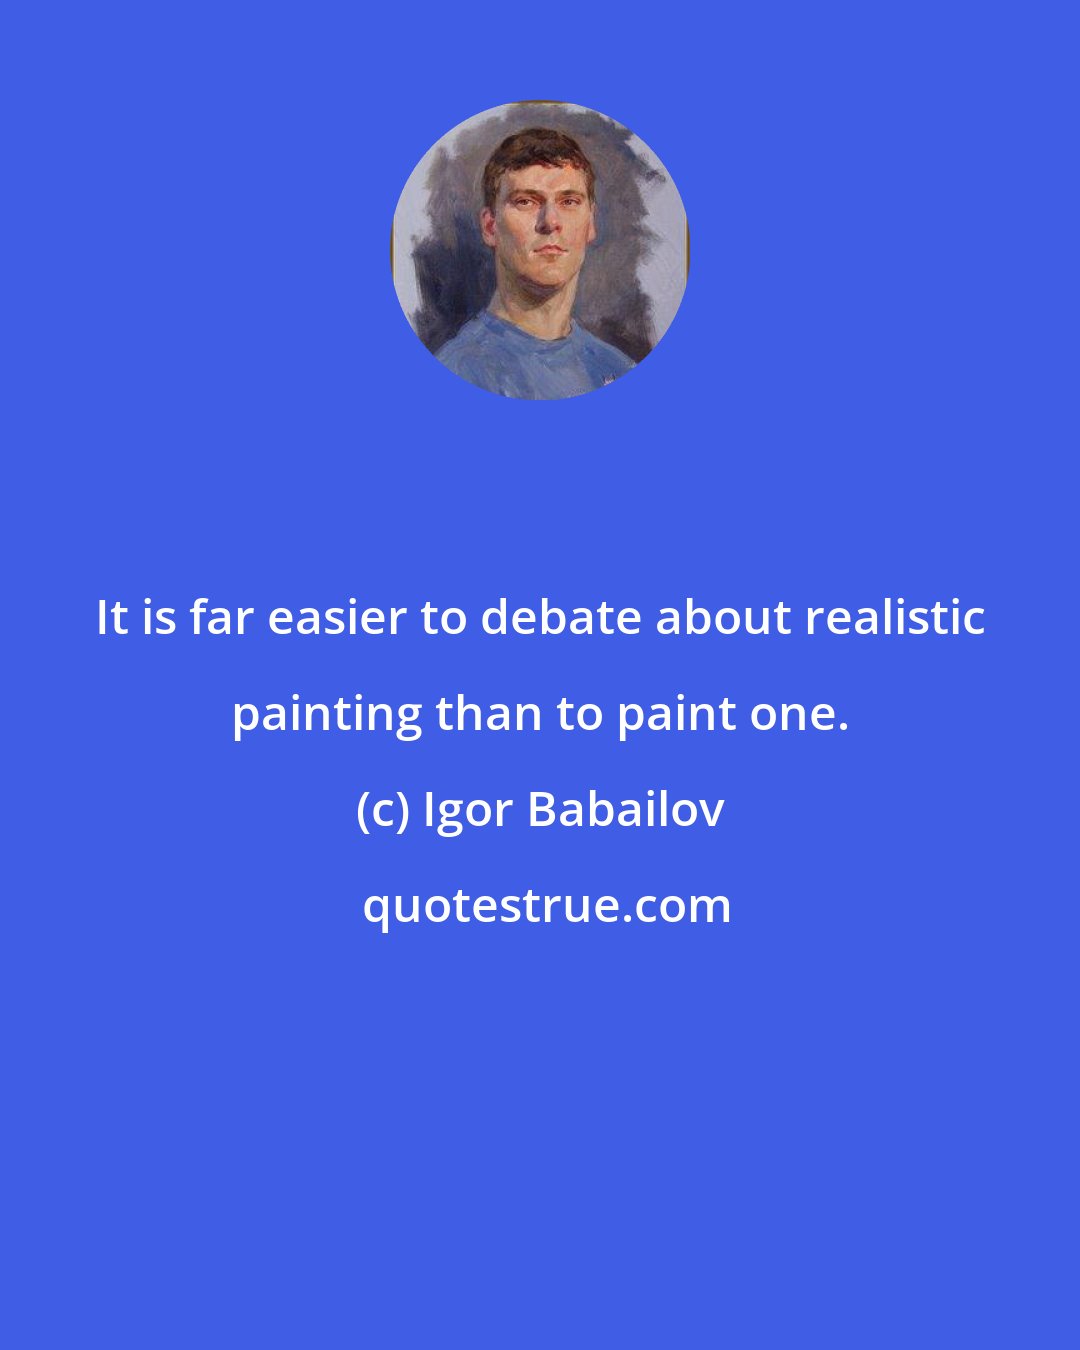 Igor Babailov: It is far easier to debate about realistic painting than to paint one.